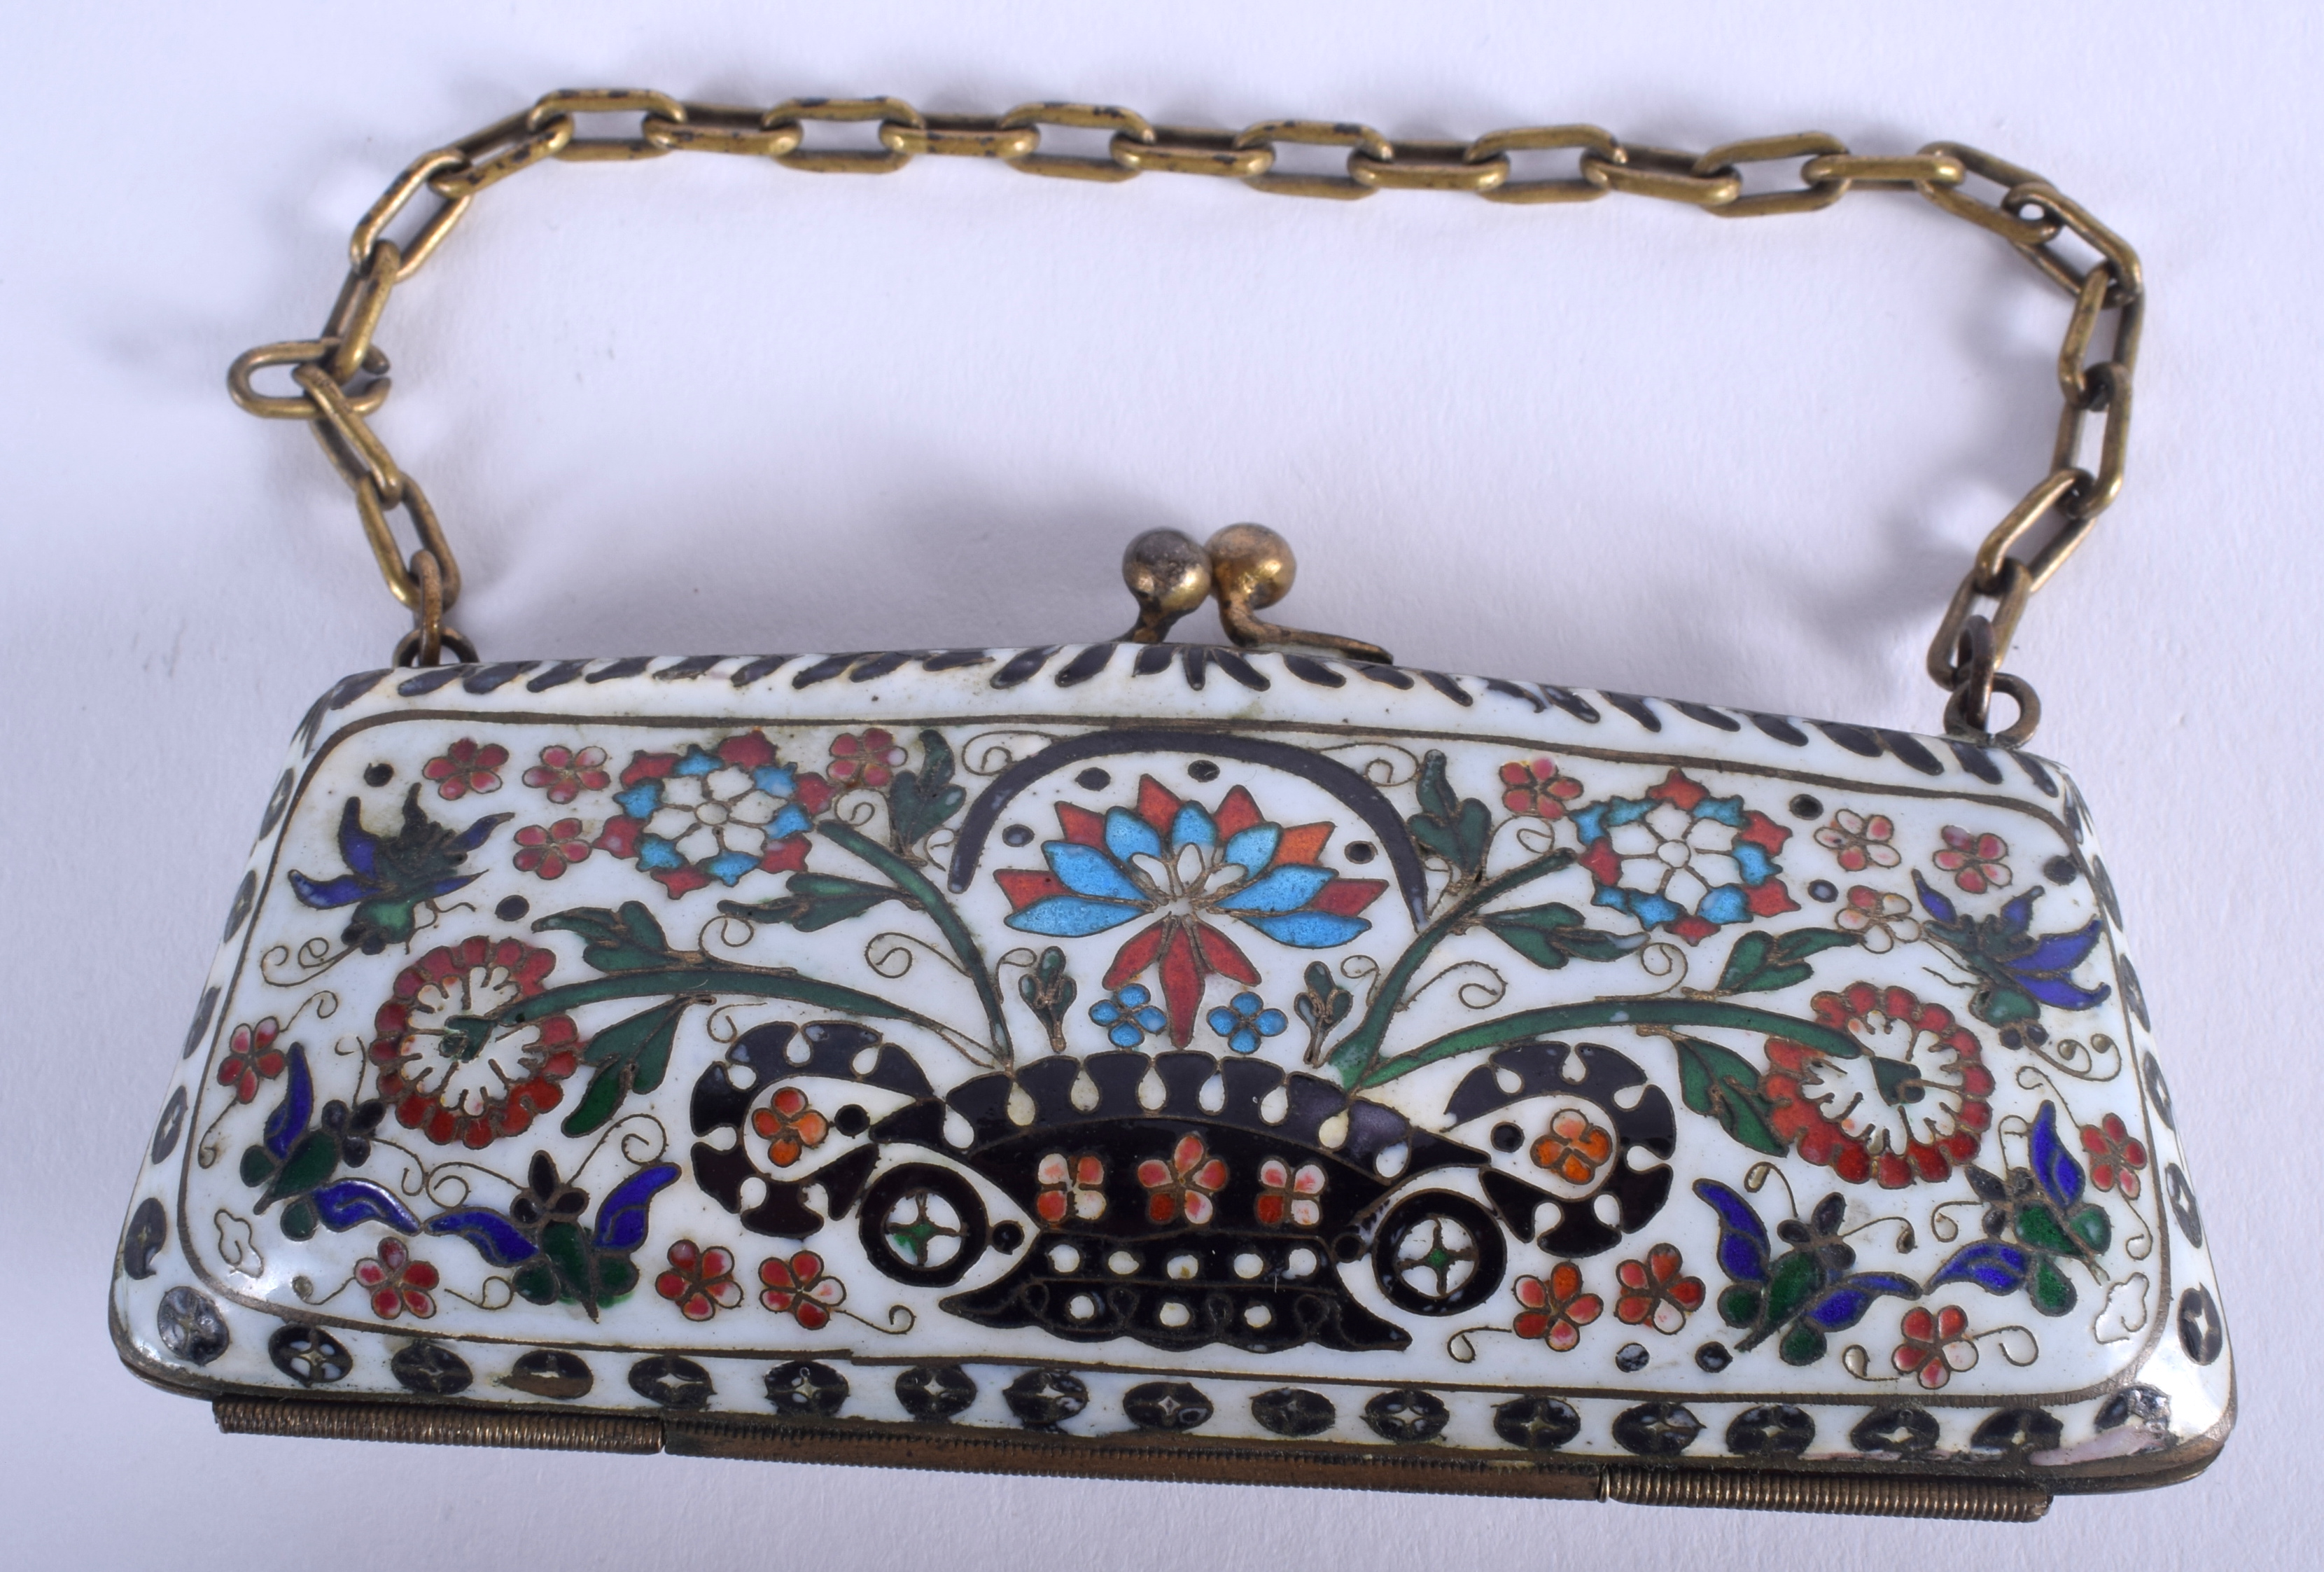 AN EARLY 20TH CENTURY CHINESE CLOISONNE ENAMEL PURSE possibly silver gilt. 11 cm x 5 cm.